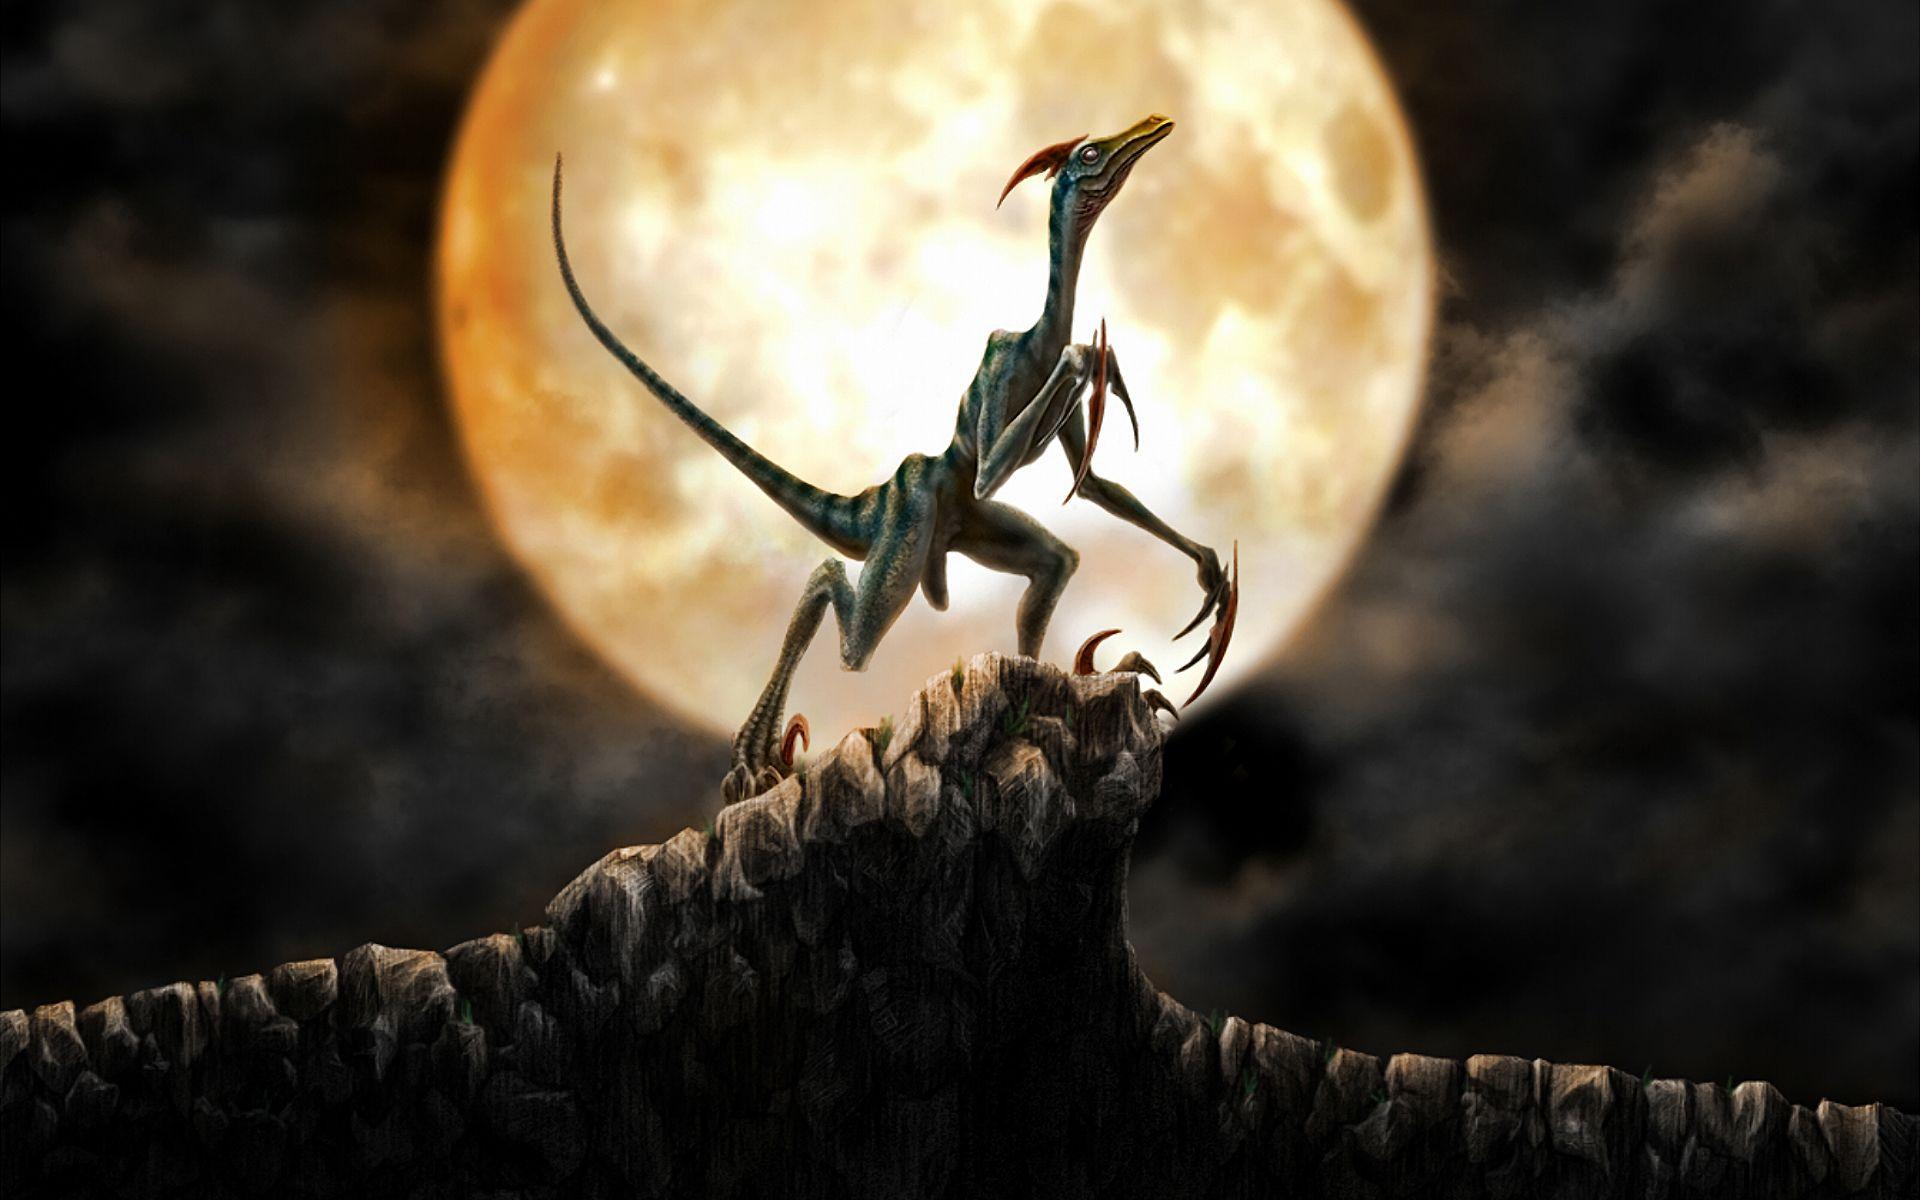 Dinosaur on moon background wallpaper and image